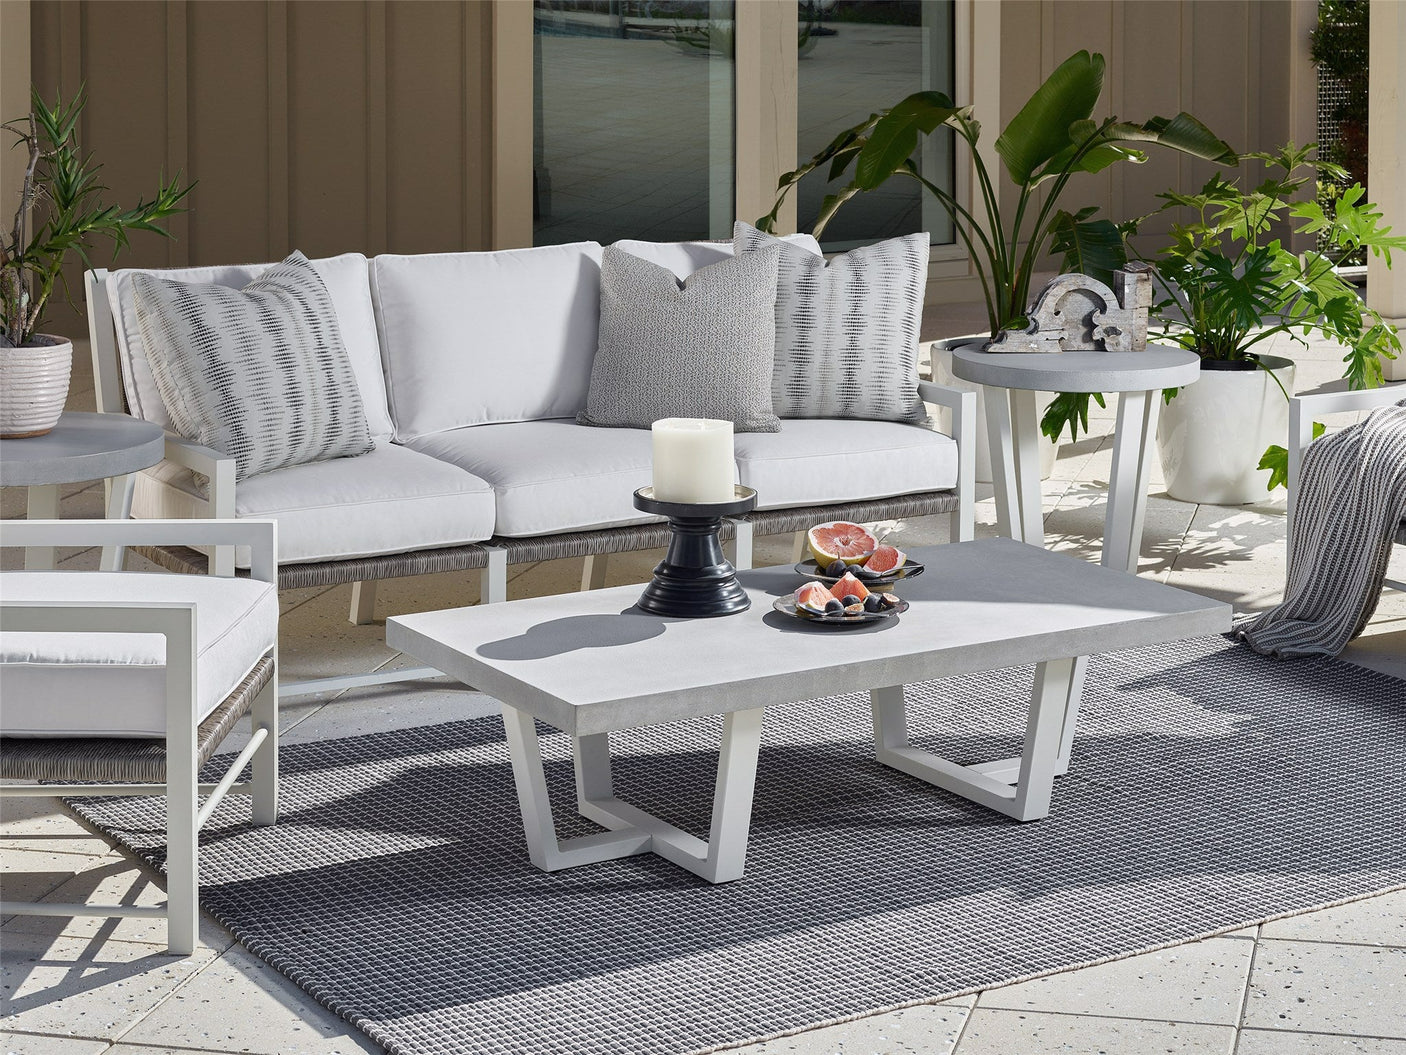 Universal Furniture Coastal Living Outdoor South Beach End Table